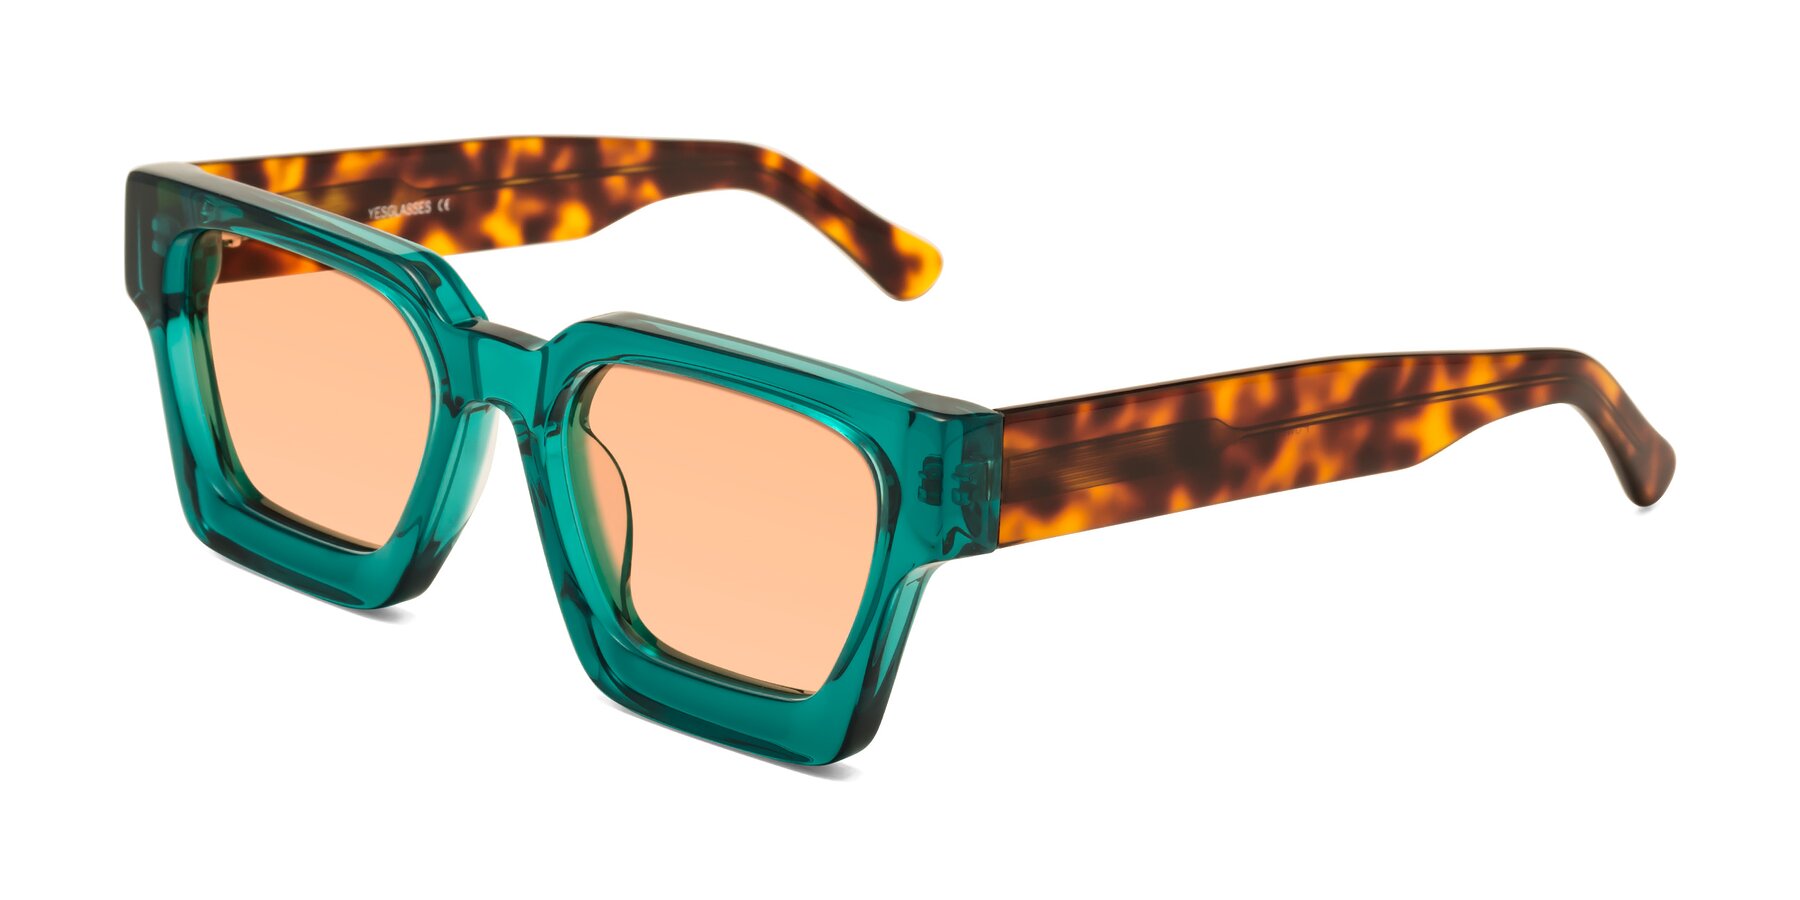 Angle of Powers in Green-Tortoise with Light Orange Tinted Lenses